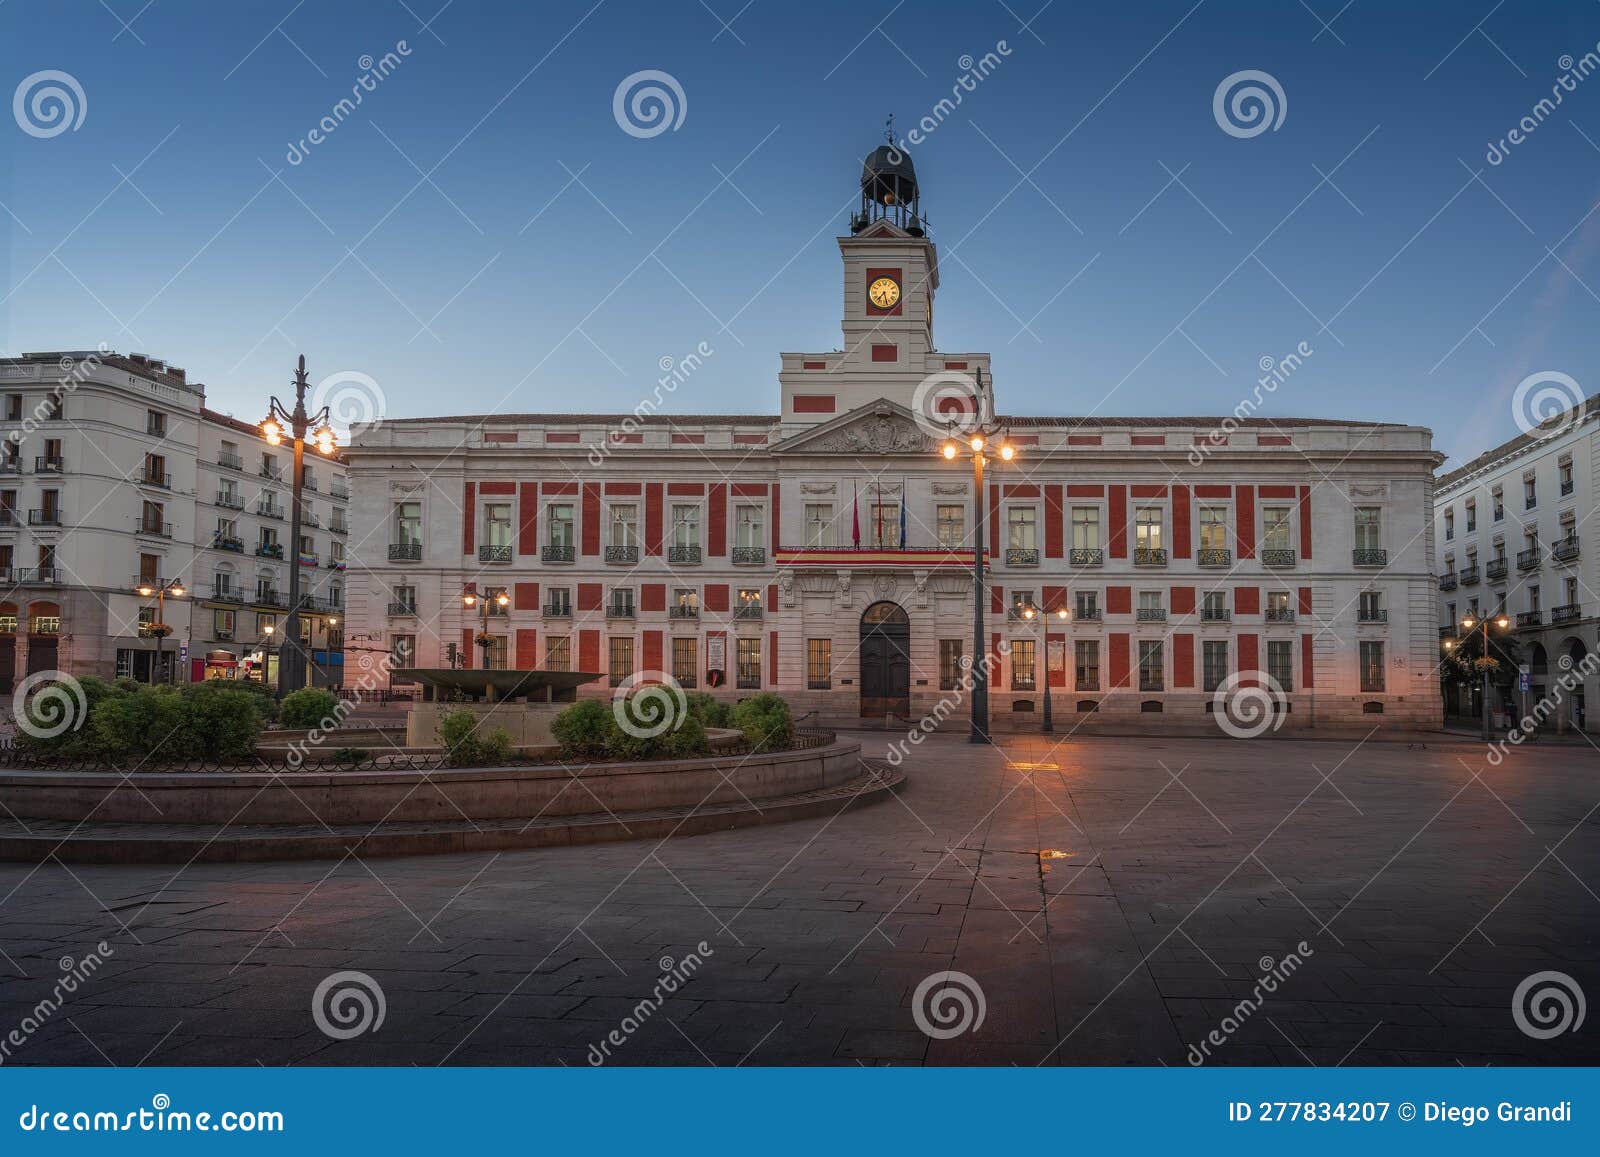 puerta del sol square at sunrise with royal house of the post office (real casa de correos) - madrid, spain